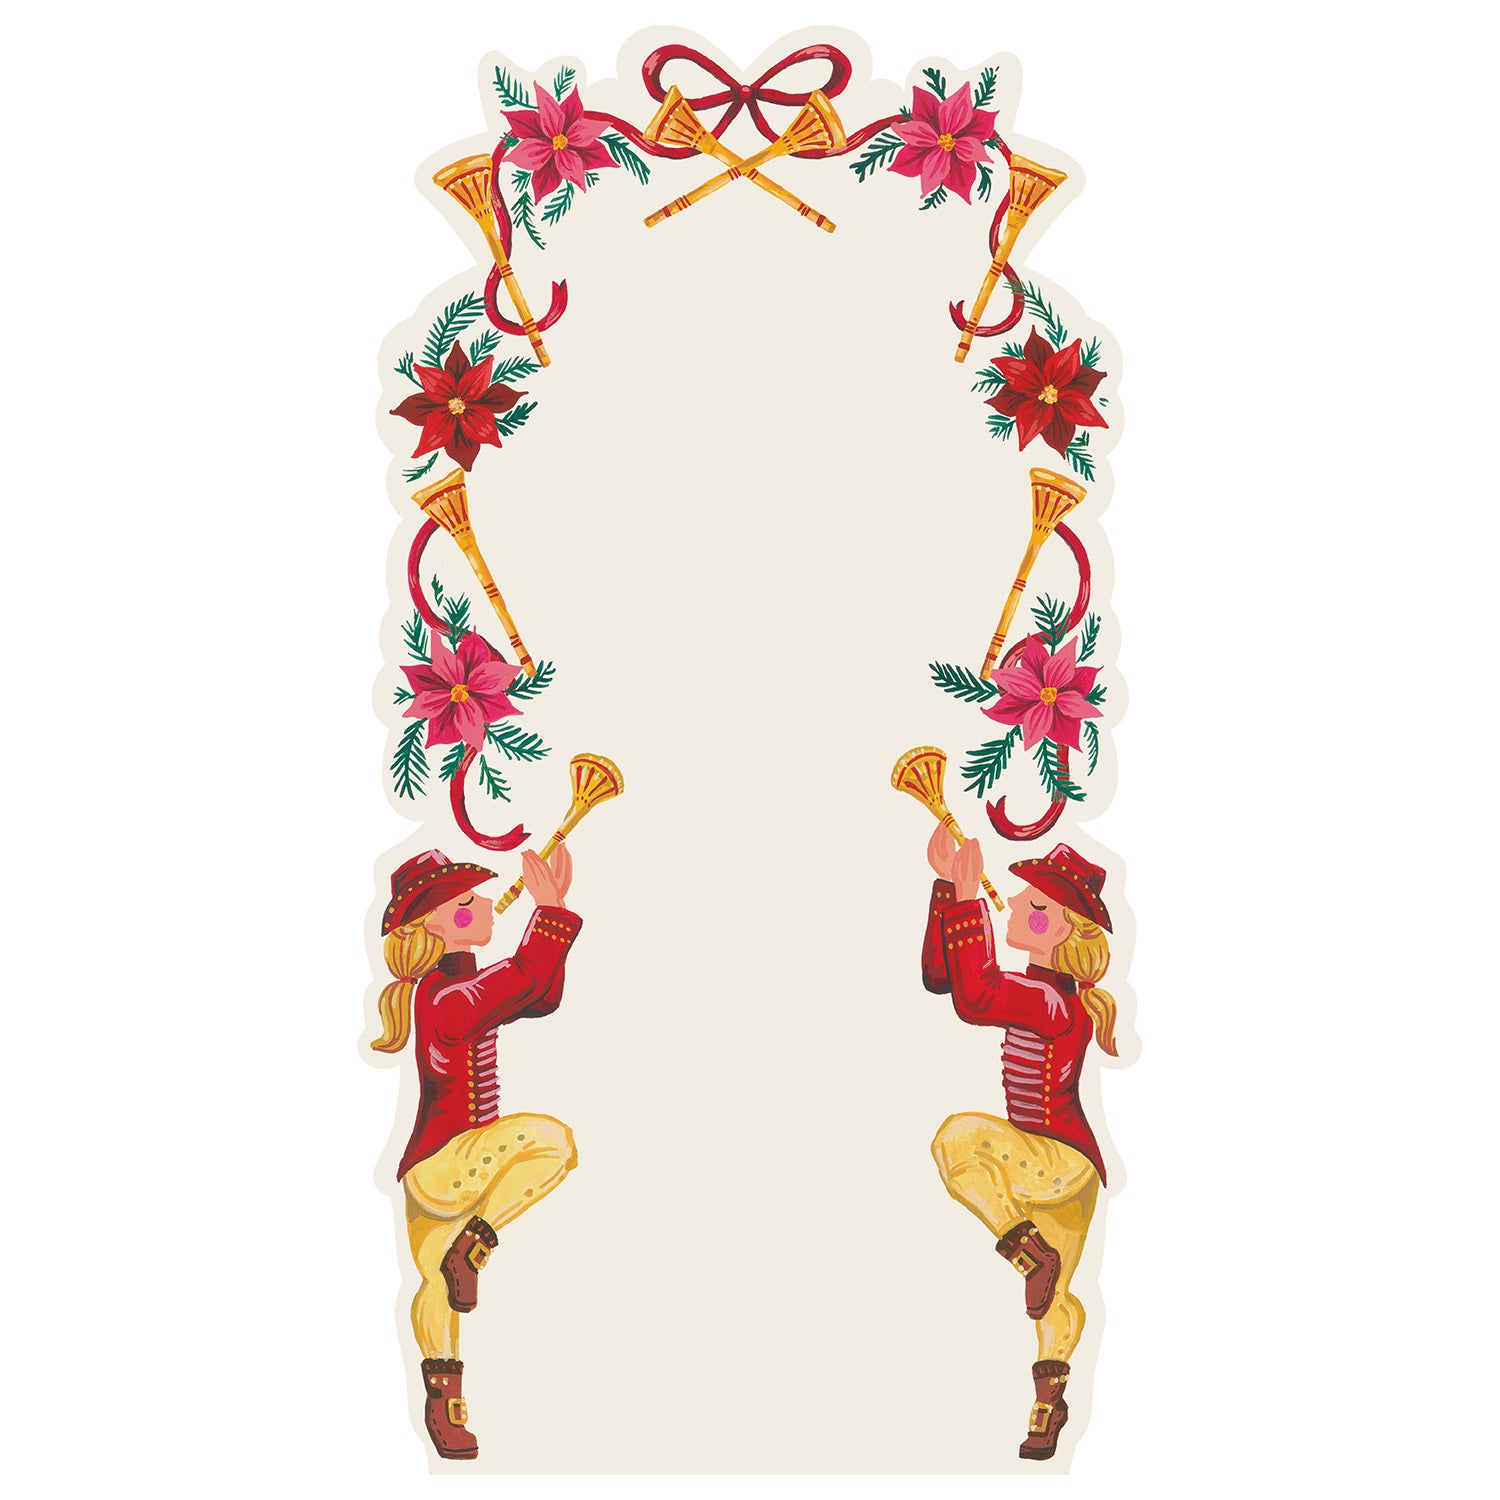 A die-cut card bordered with whimsical illustrations; on either side of the bottom are two people in vintage marching band outfits playing horns, and surrounding the upper part of the card is a repeating pattern of horns, poinsettia blooms, and red ribbon tied in a bow at the top.